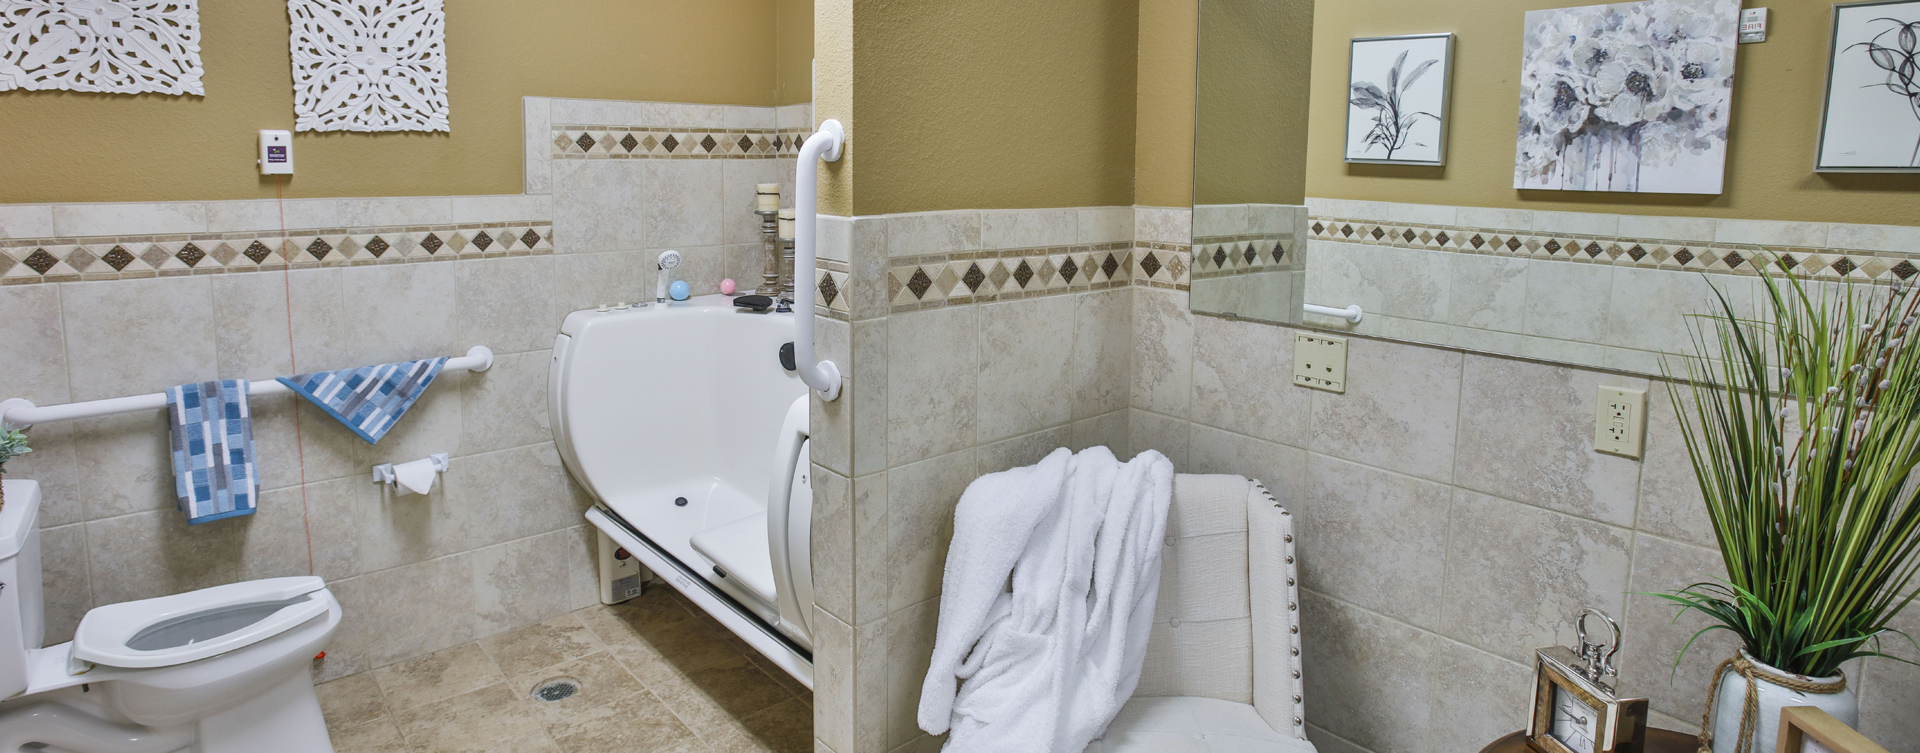 With an easy access design, our whirlpool allows you to enjoy a warm bath safely and comfortably at Bickford of Peoria